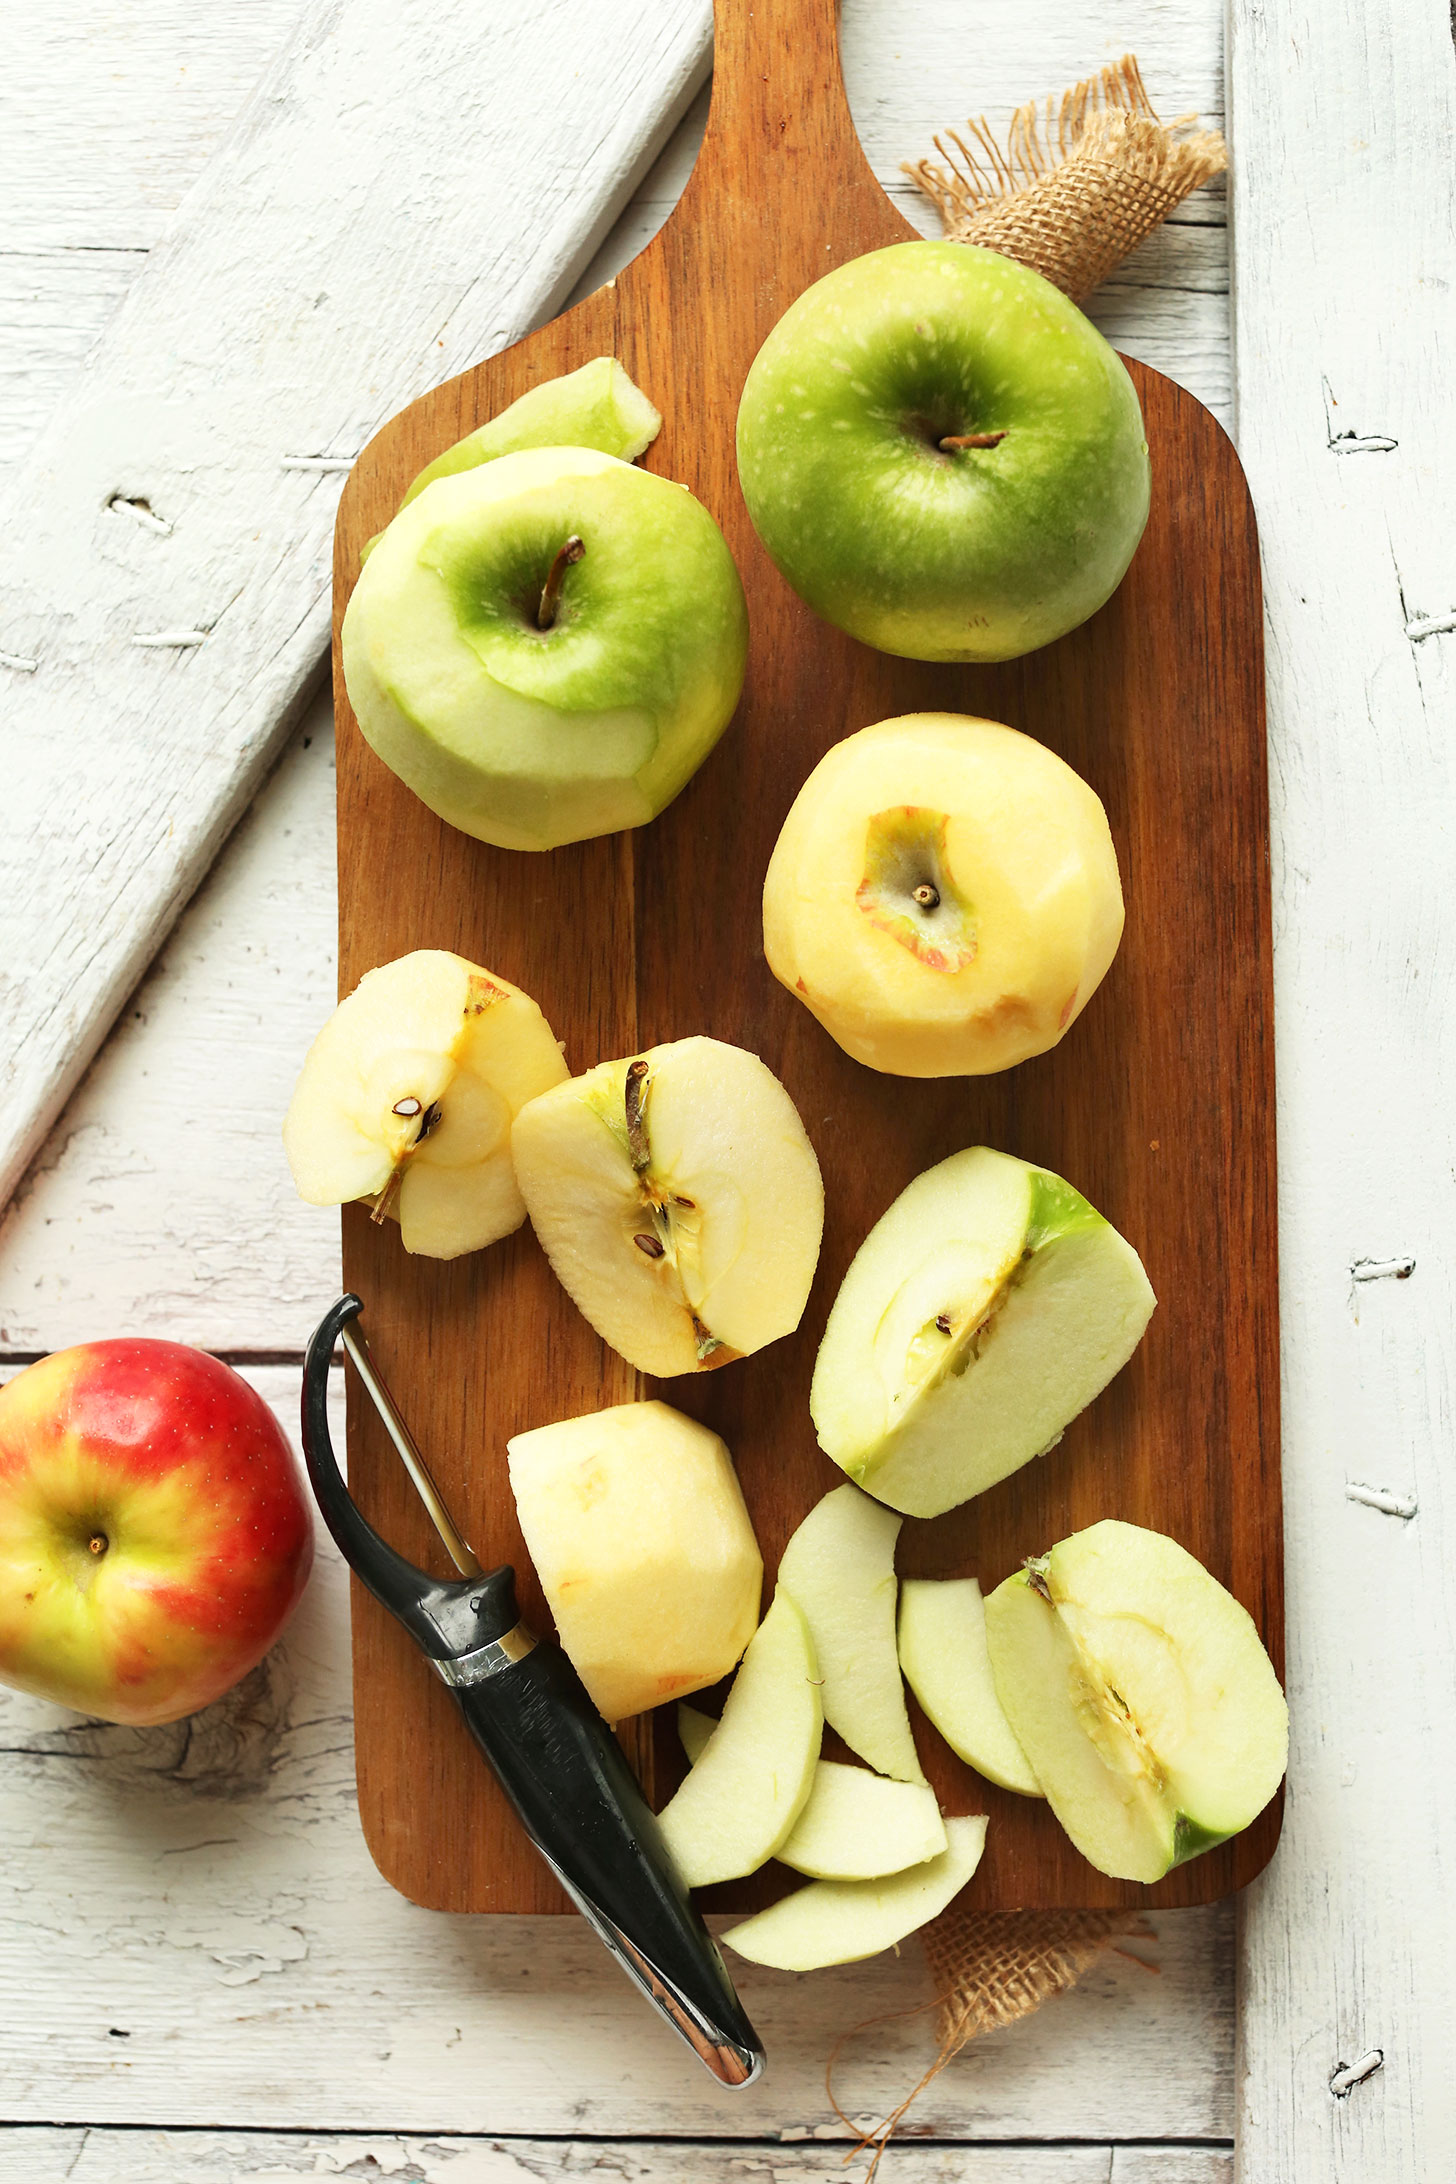 Apples on a cutting board for making delicious naturally-sweetened vegan apple crisp